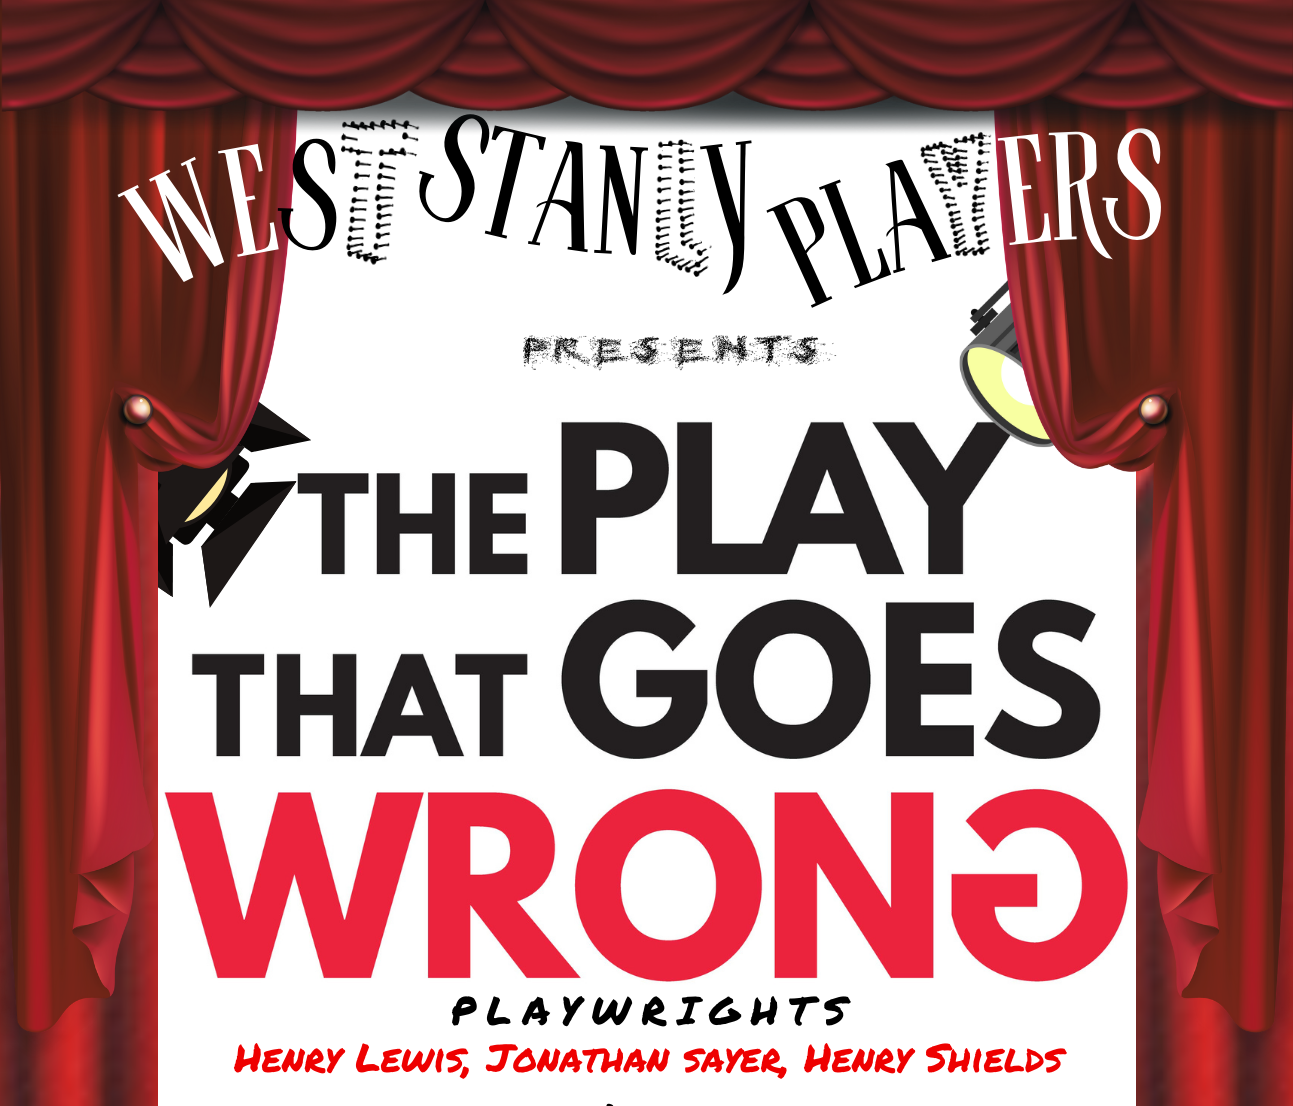 West Stanly Players presents “The Play That Goes Wrong”